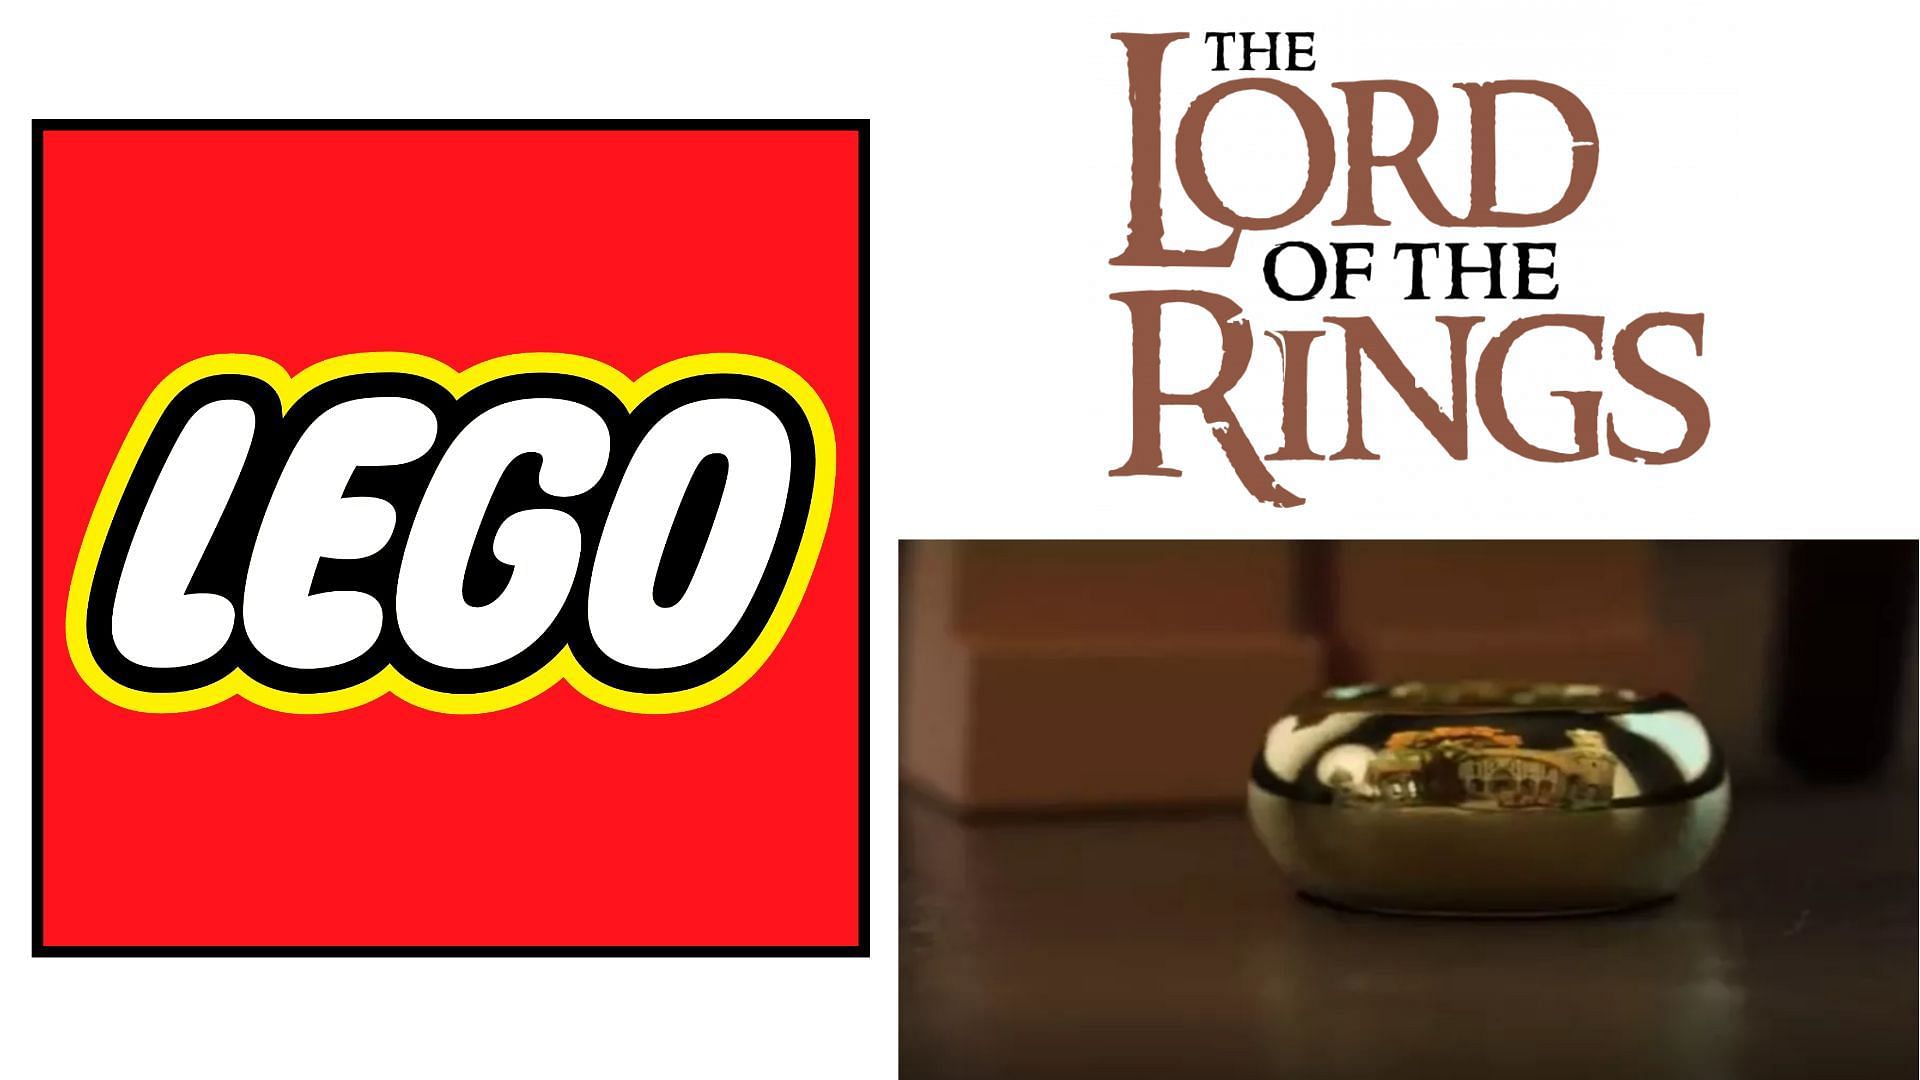 Lego teases the Lord of the Rings Rivendell set expected to launch this March (Image via Lego)